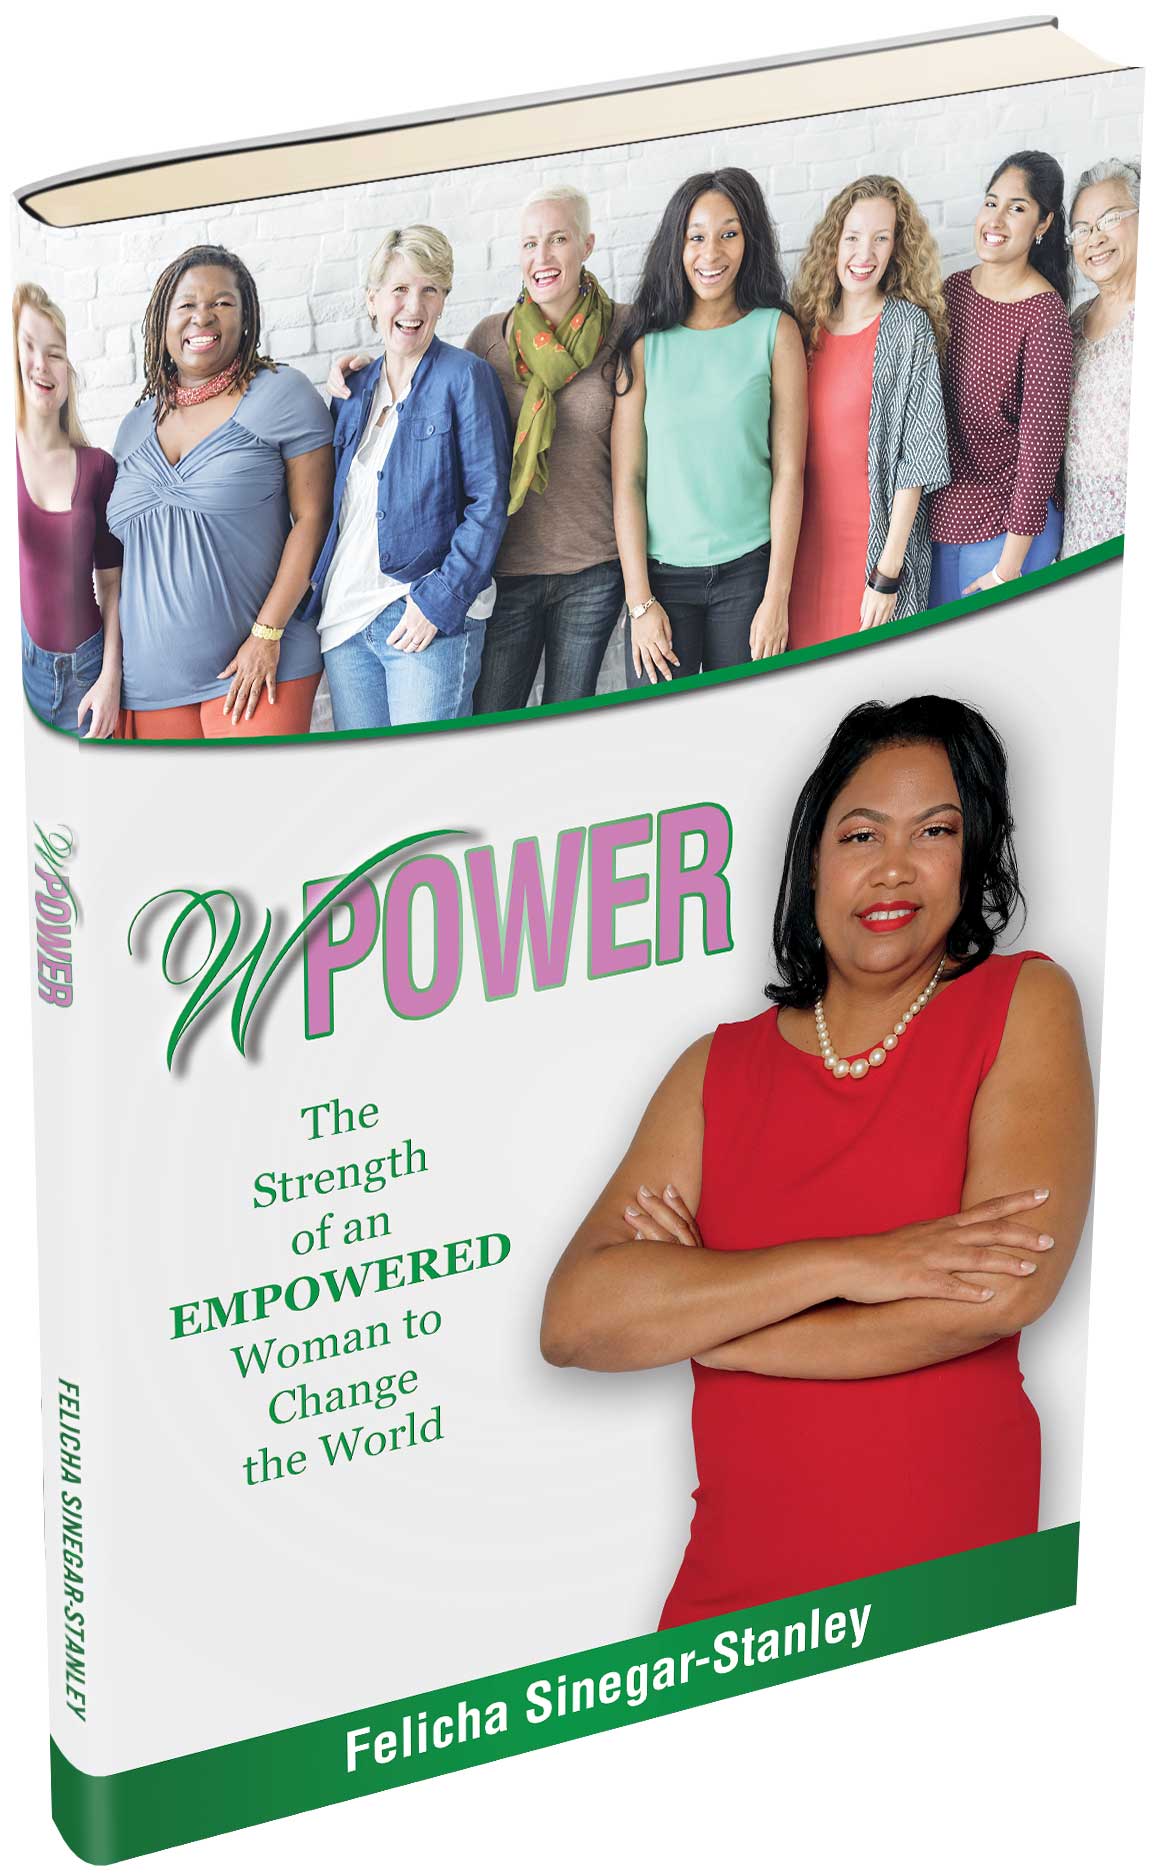 “wPower: The Strength of An Empowered Woman to Change the World” book cover